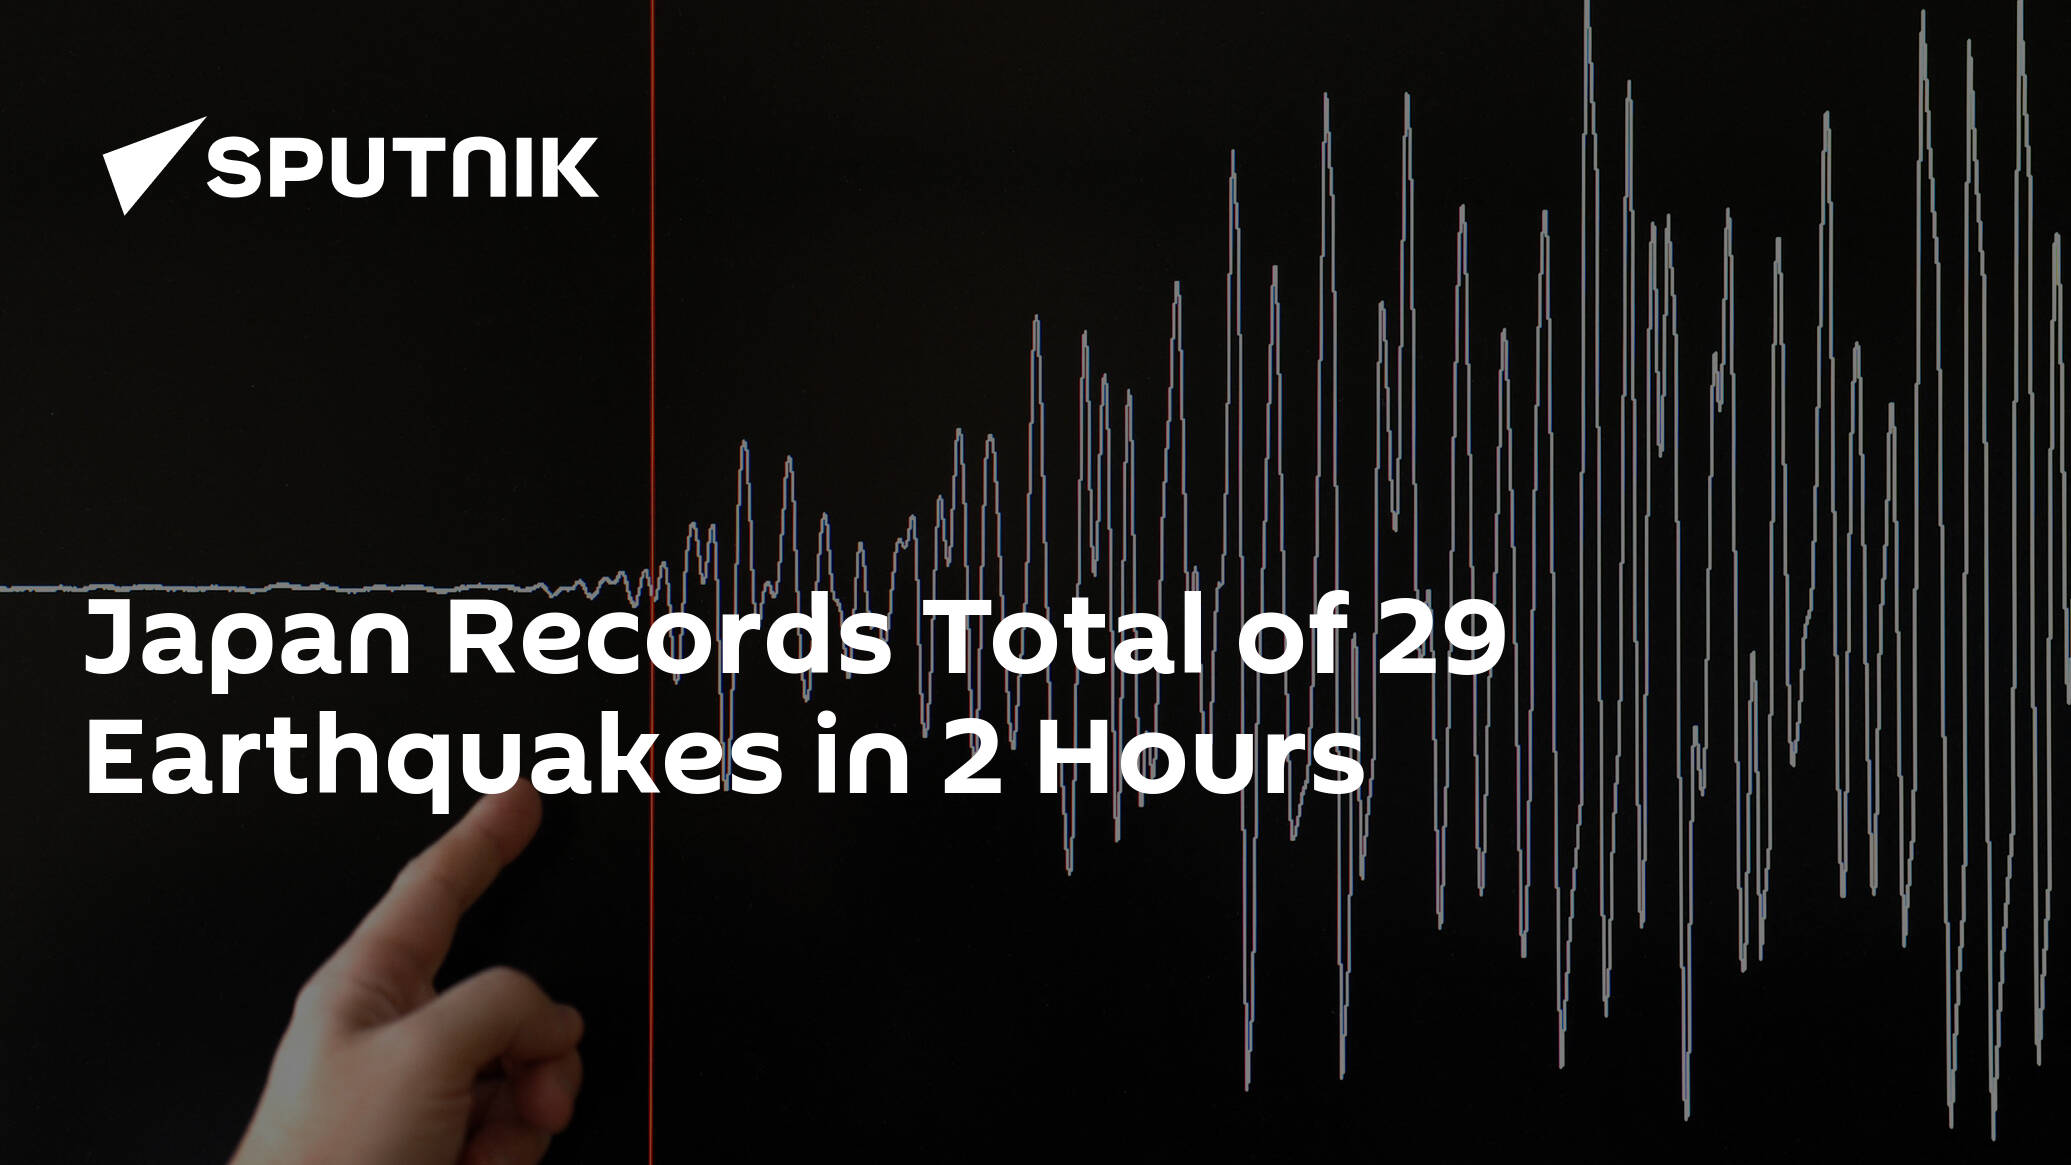 Japan Records Total of 29 Earthquakes in 2 Hours